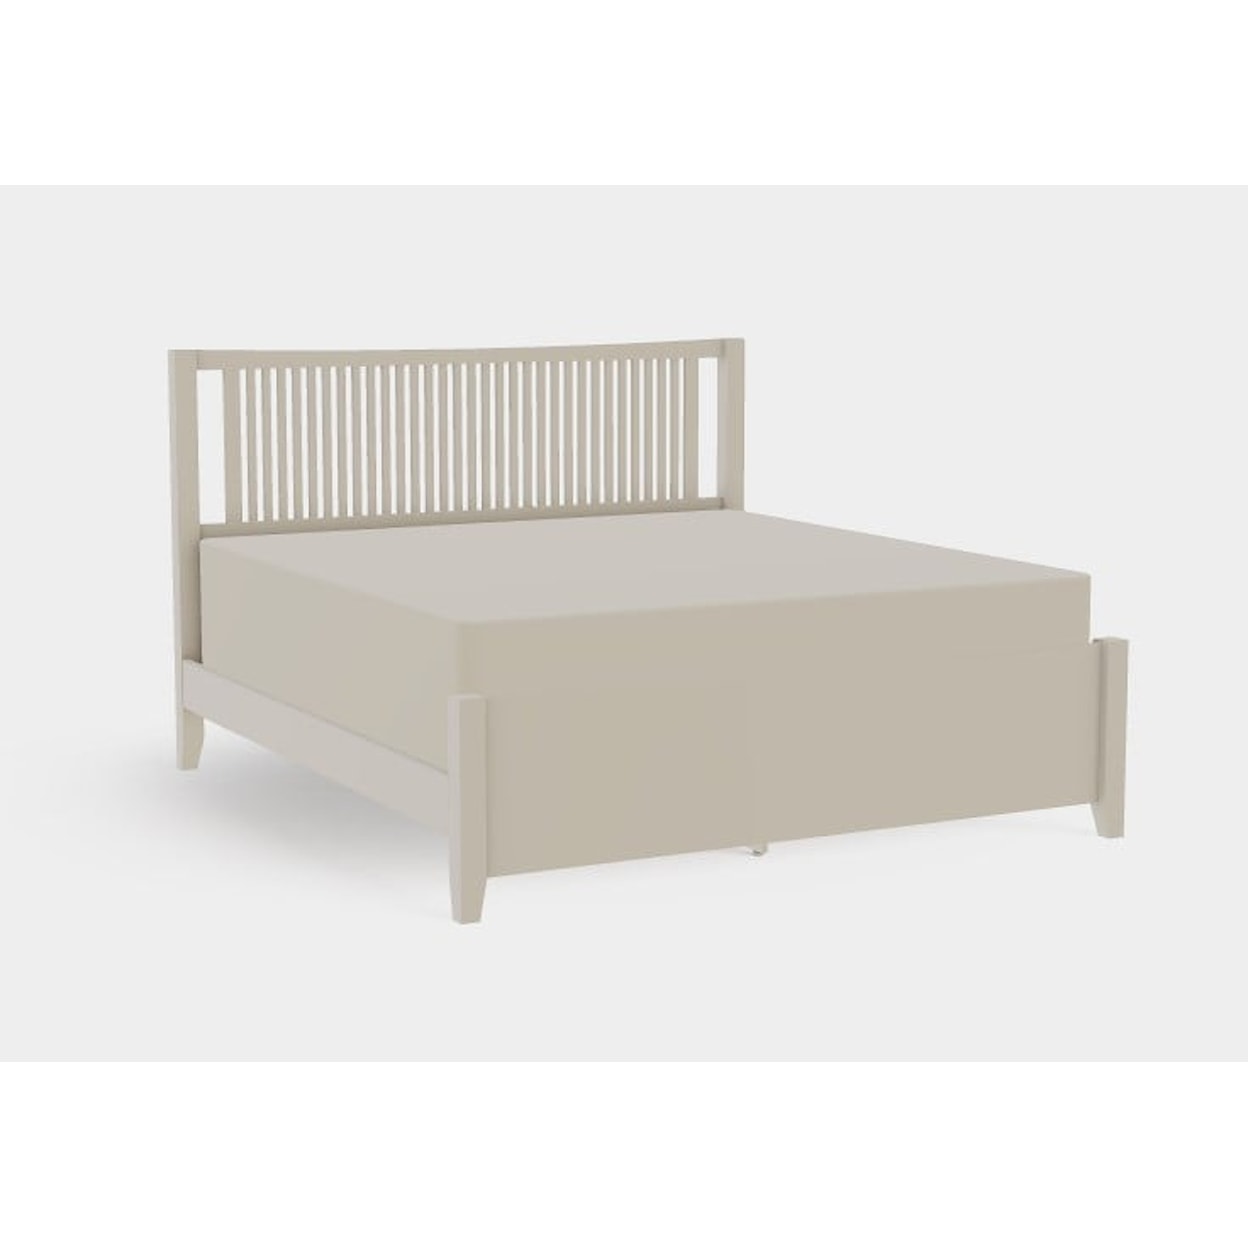 Mavin Atwood Group Atwood King Low Footboard Spindle Bed